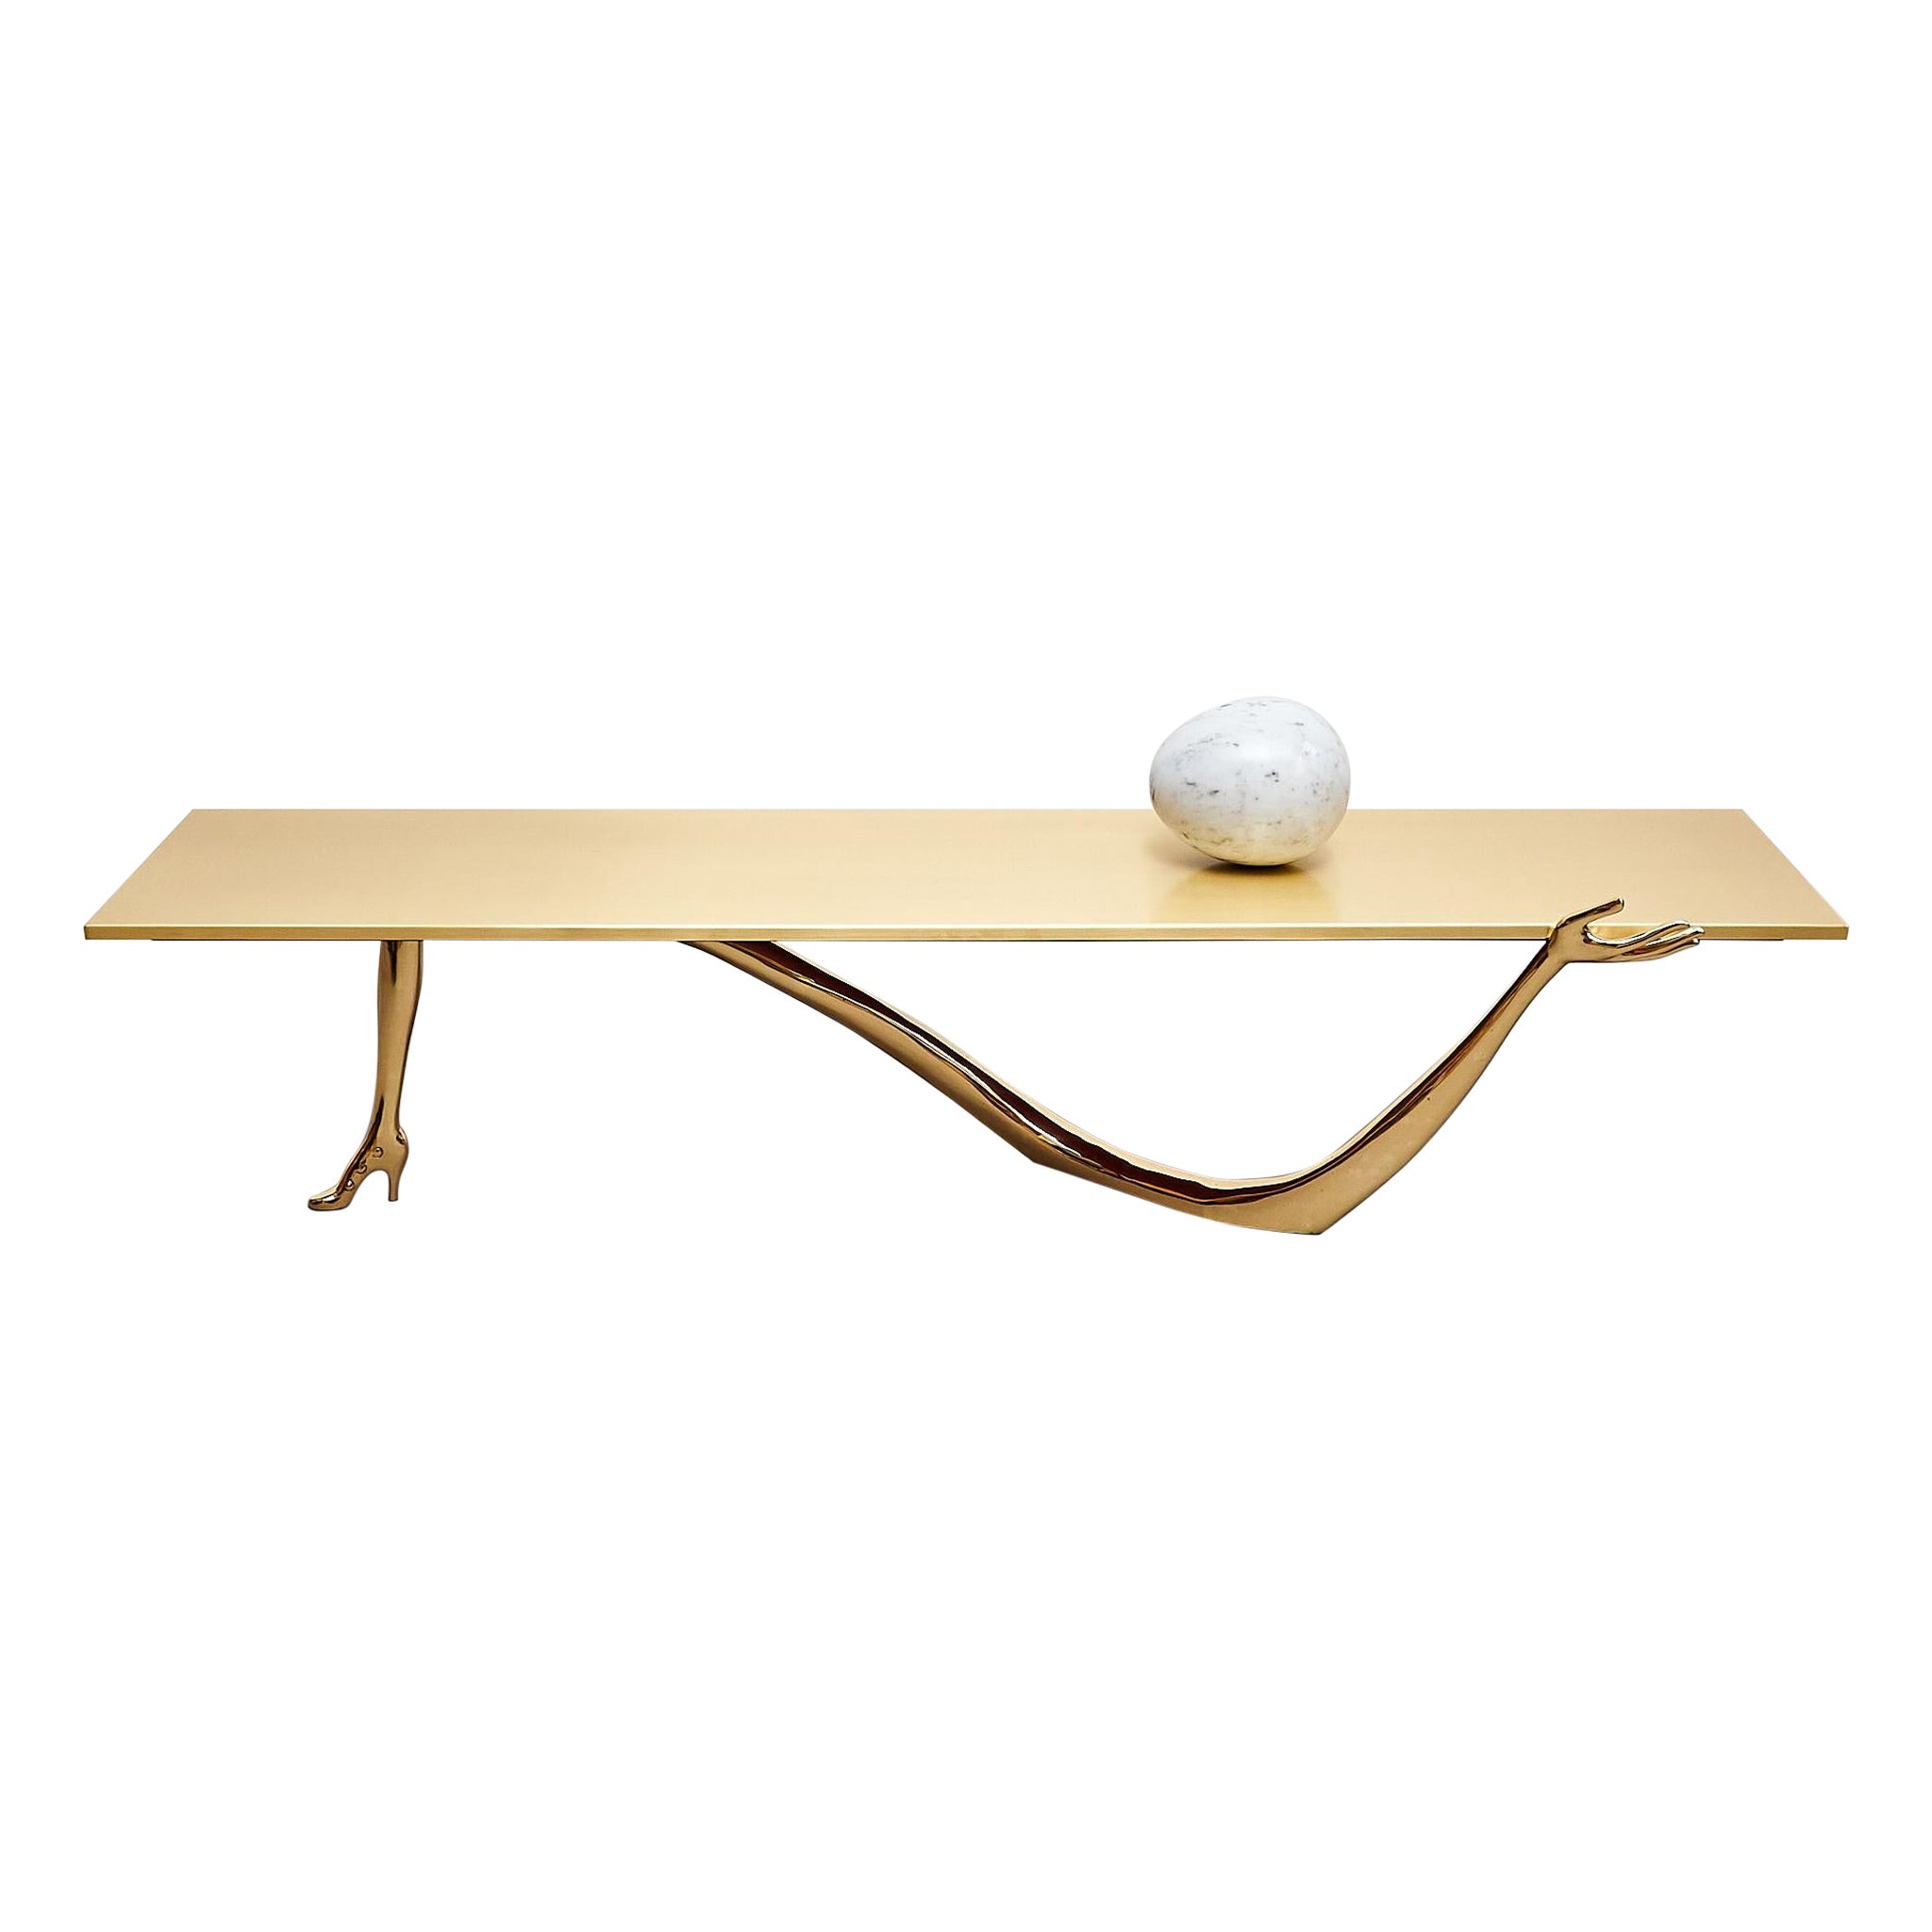 Elegance Redefined: The Leda Low Table by Dalí and BD – Artistry in Every Detail For Sale